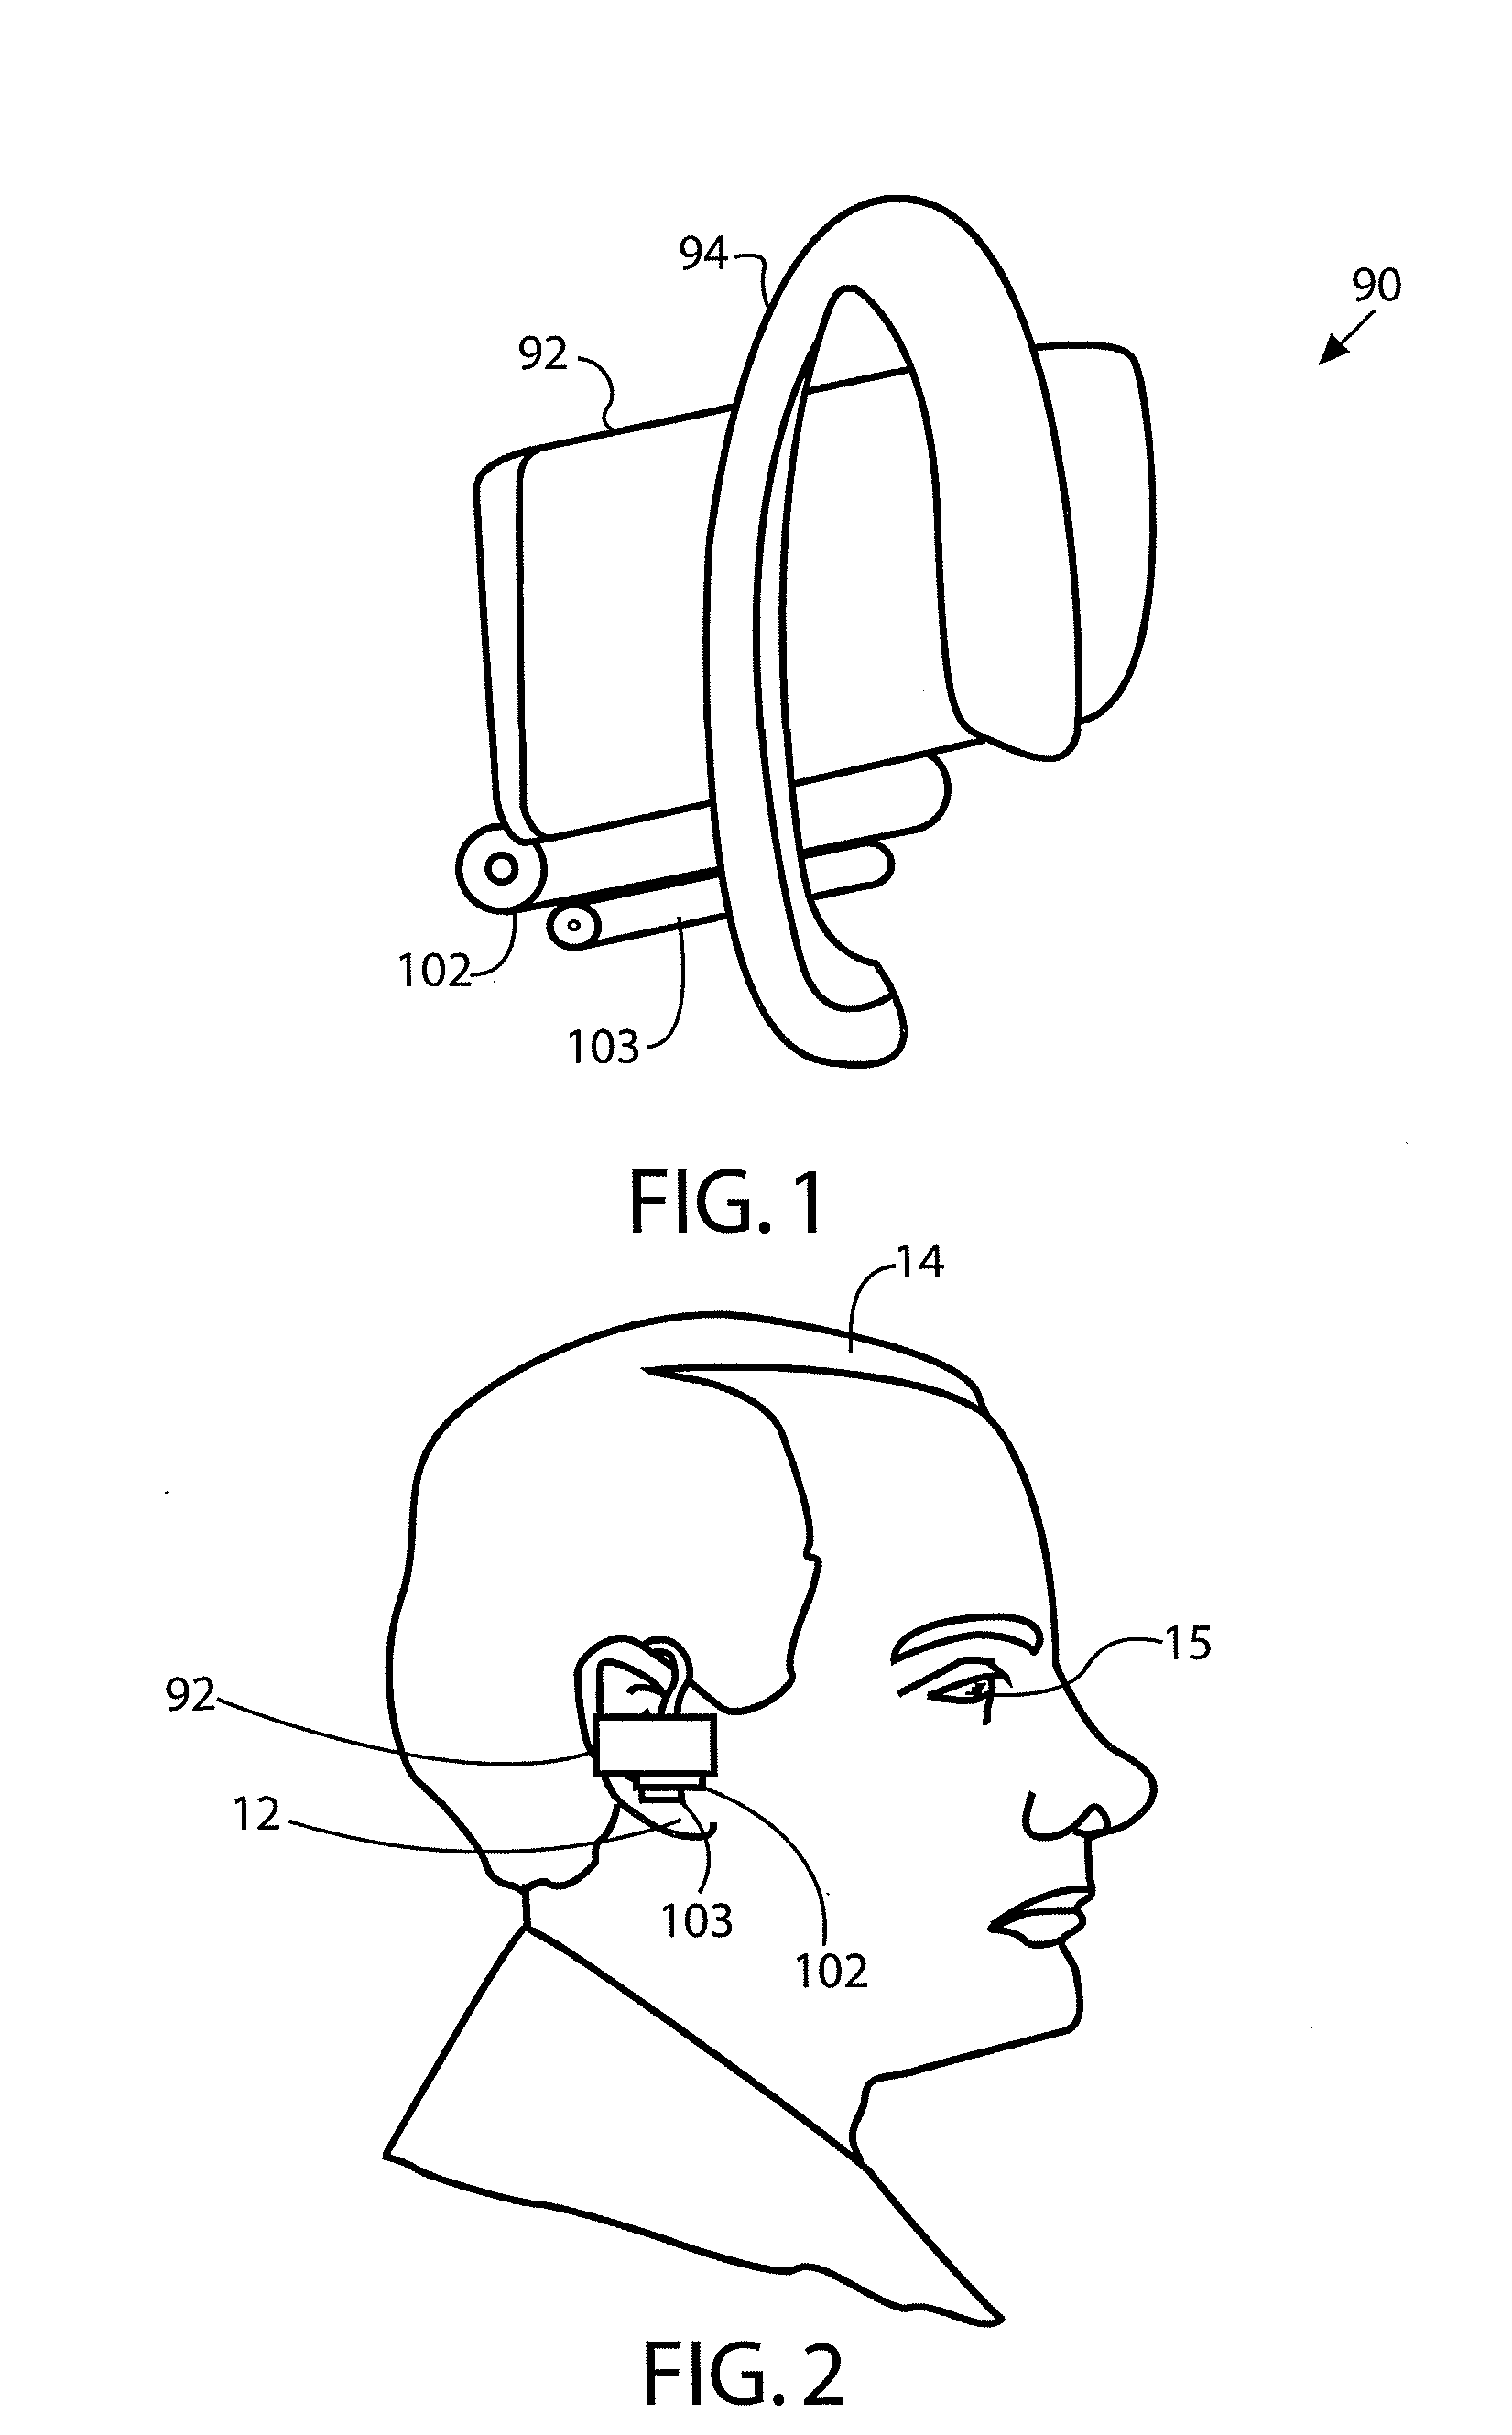 Security and monitoring apparatus